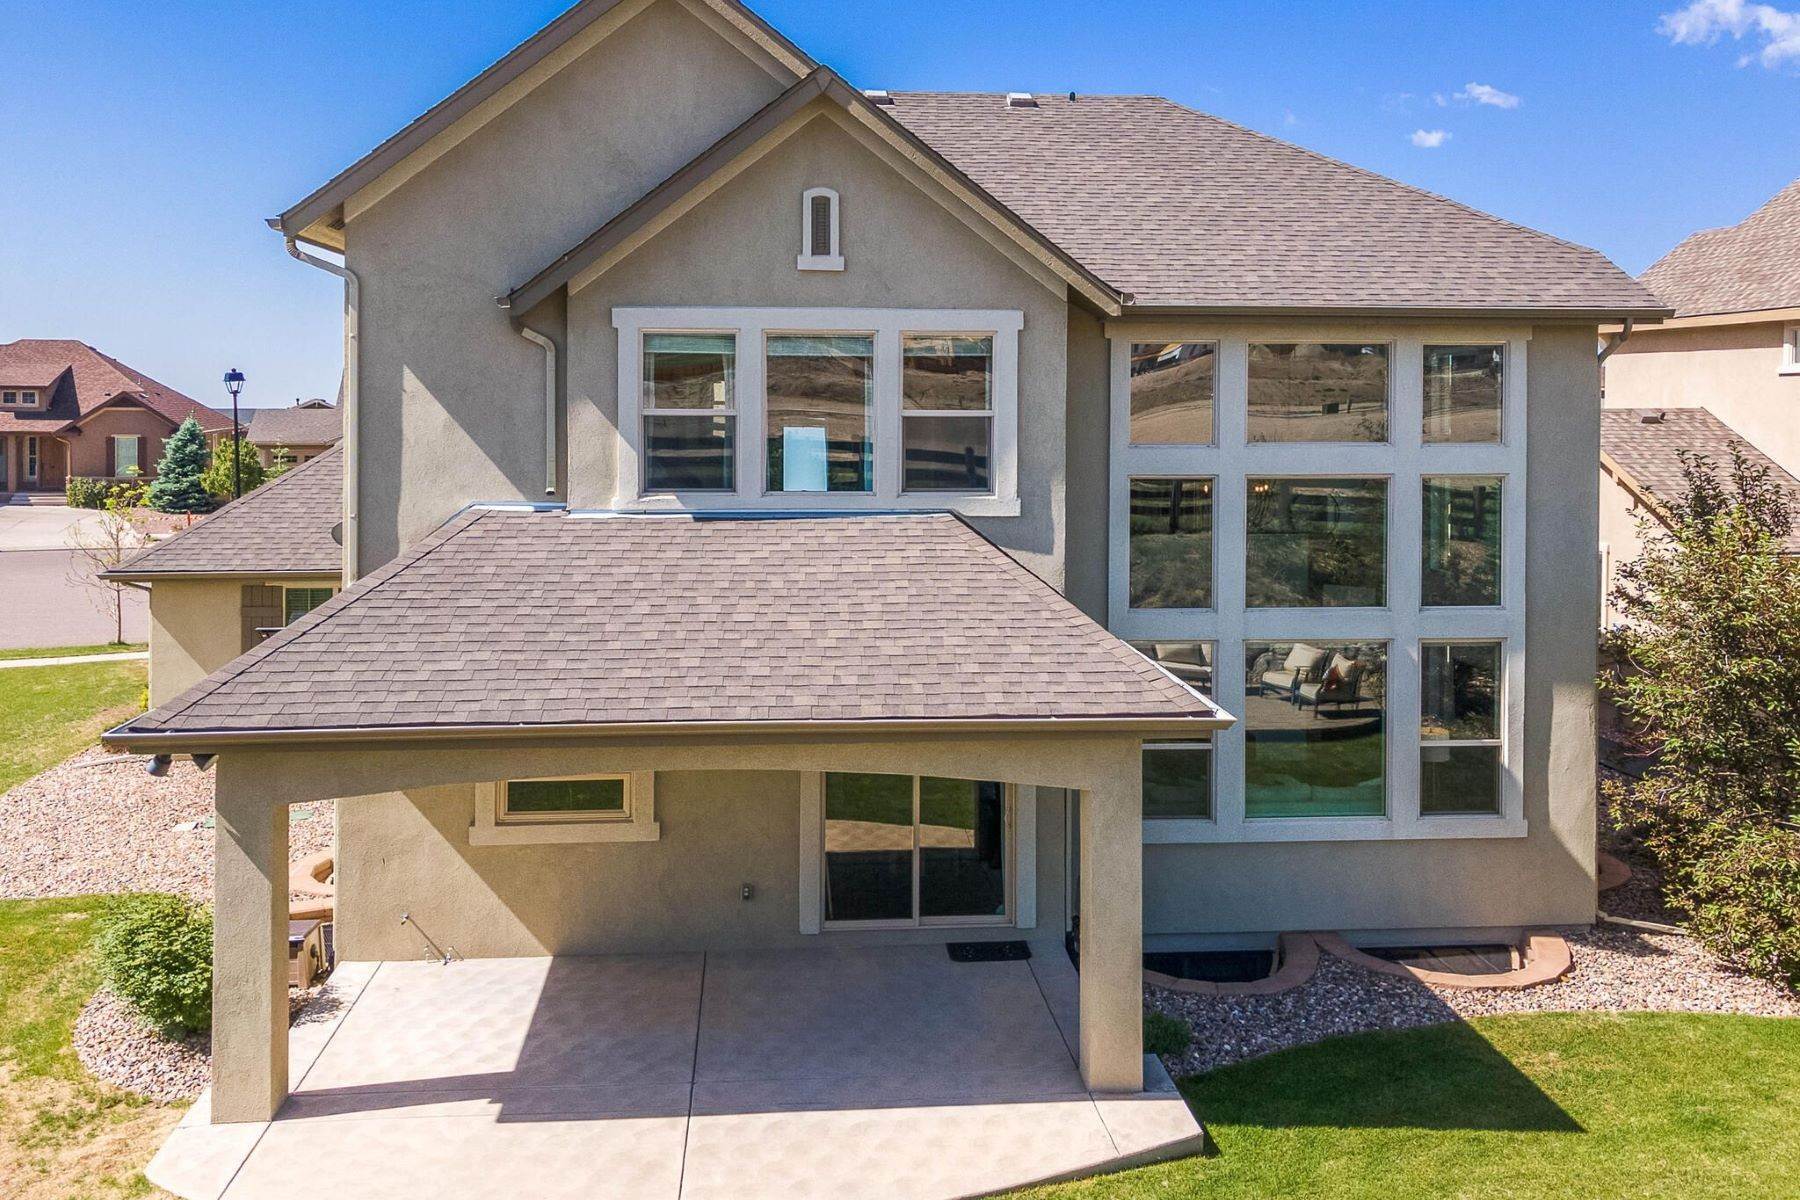 12. Single Family Homes for Active at Ease-filled life awaits with this semi-custom home backing to a greenbelt 5270 Fraser Valley Lane Colorado Springs, Colorado 80924 United States